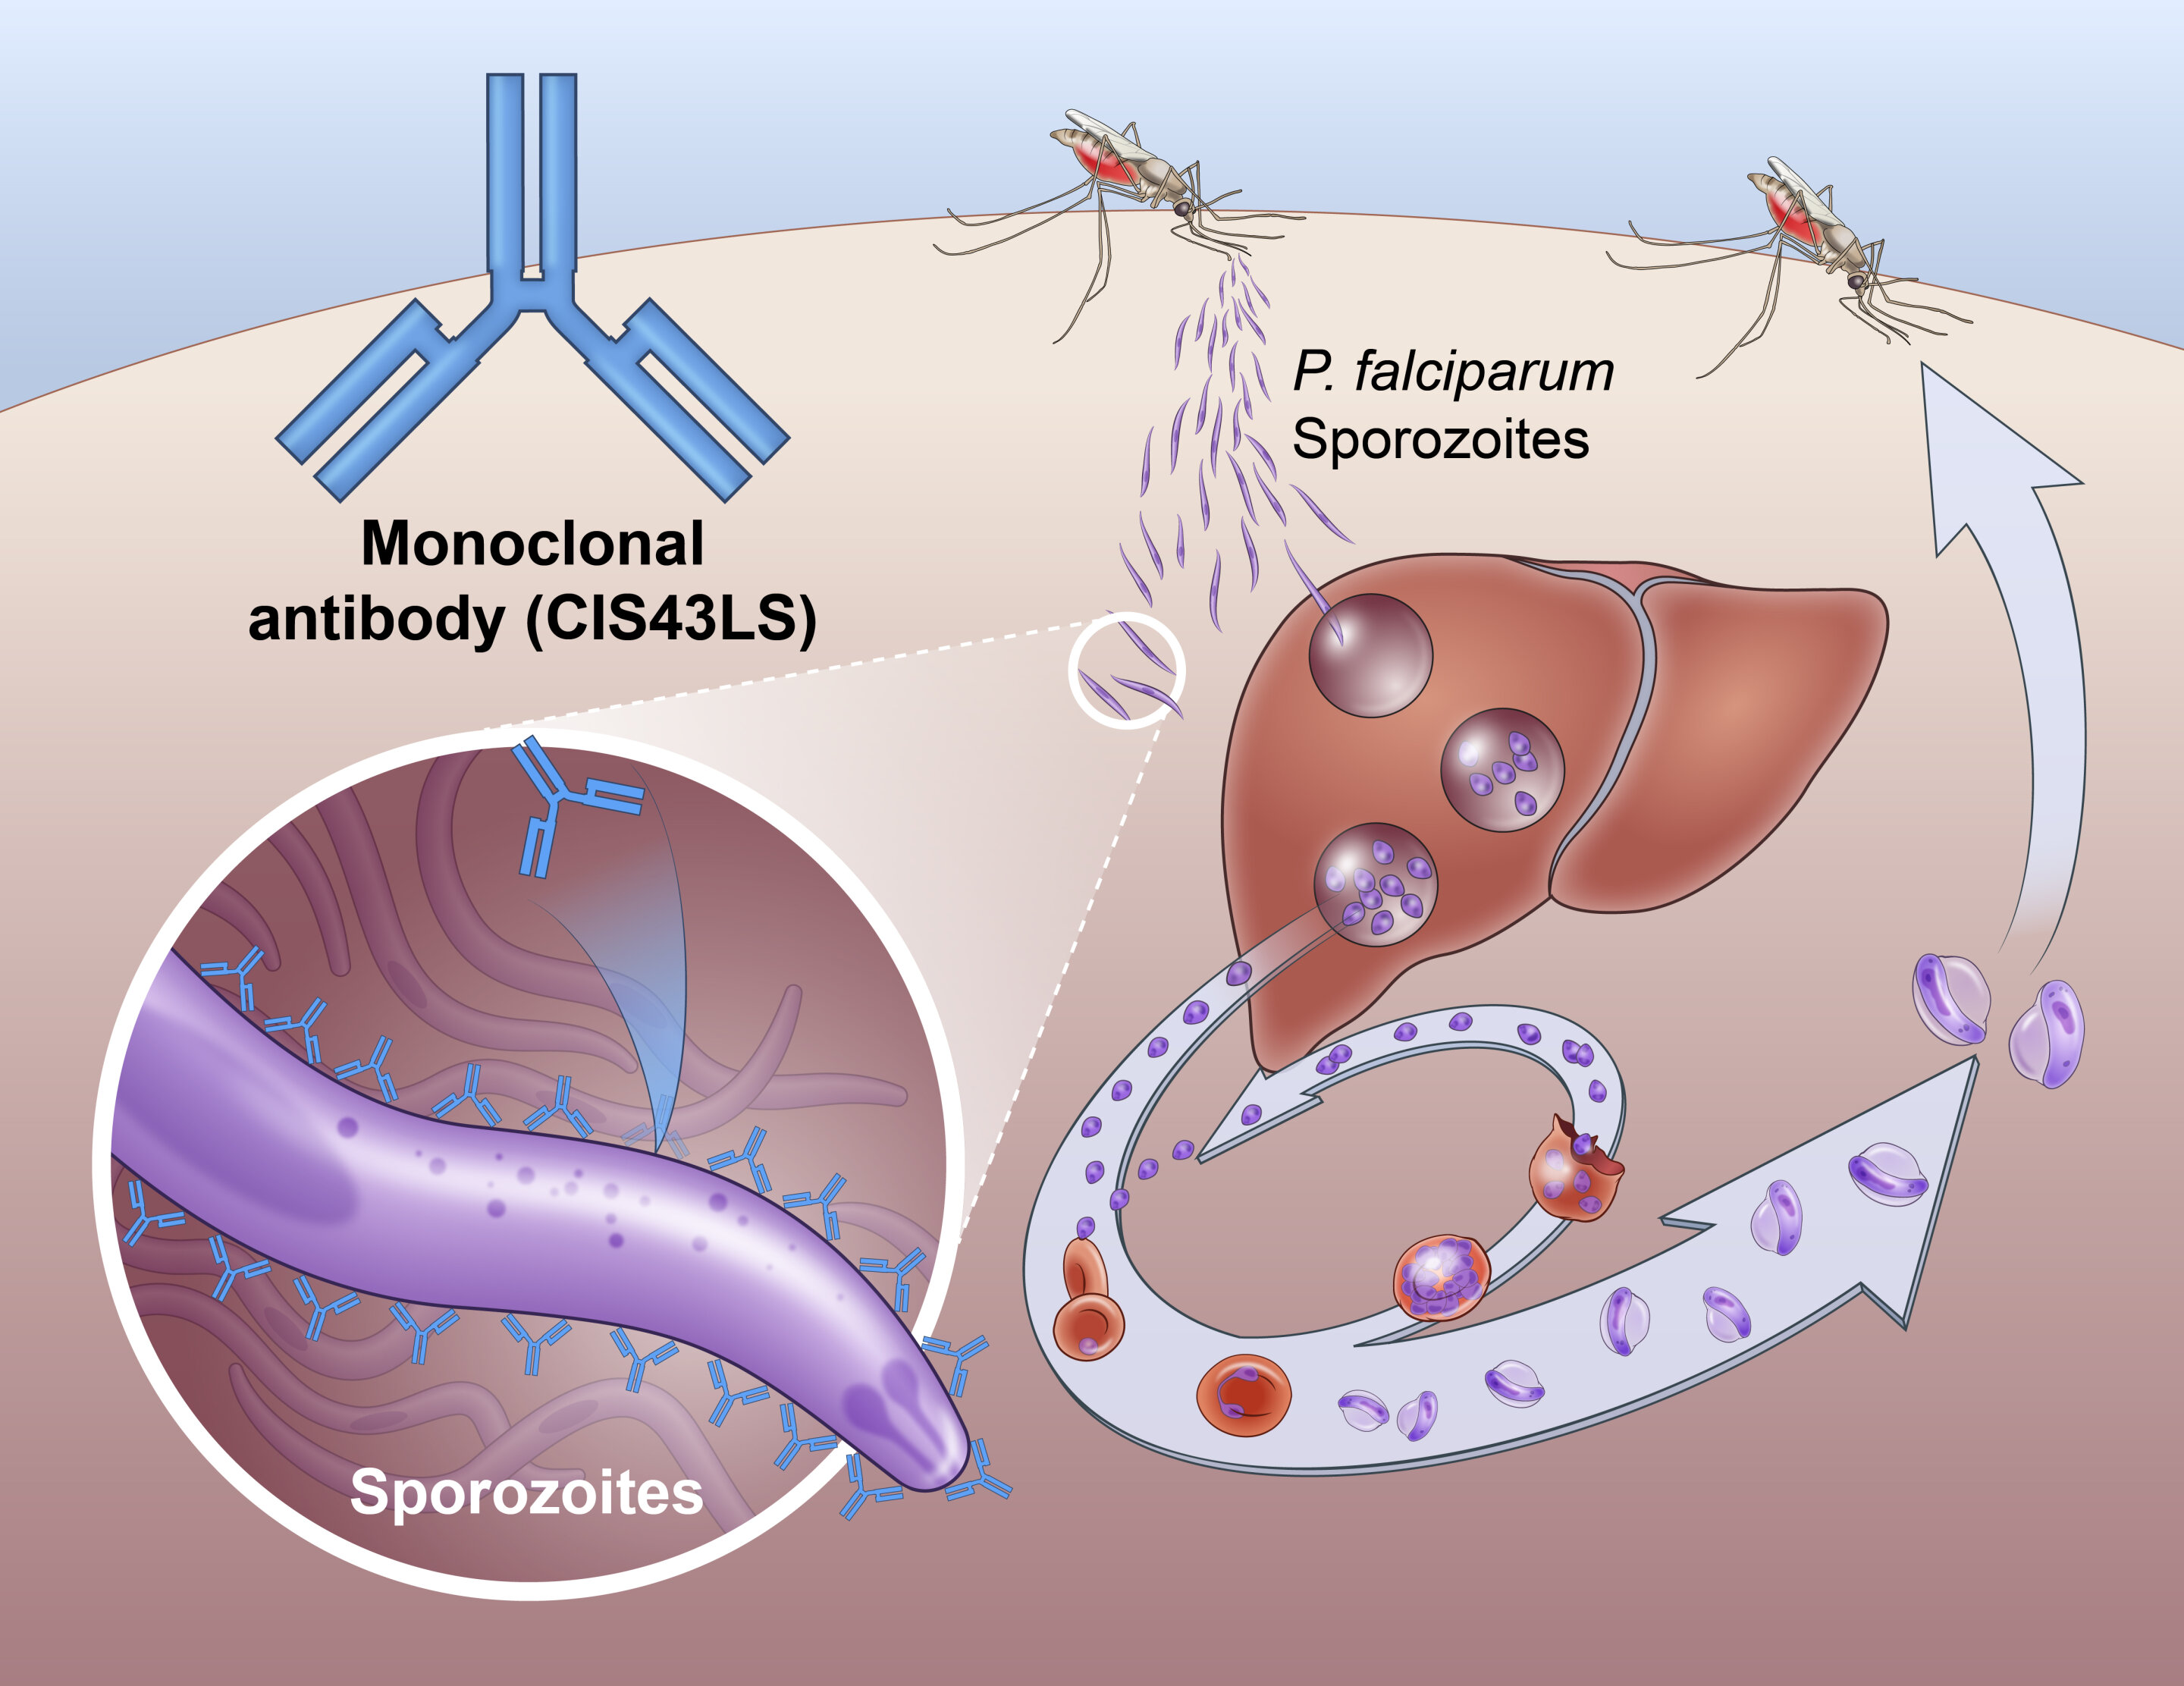 #Monoclonal antibody prevents malaria infection in African adults